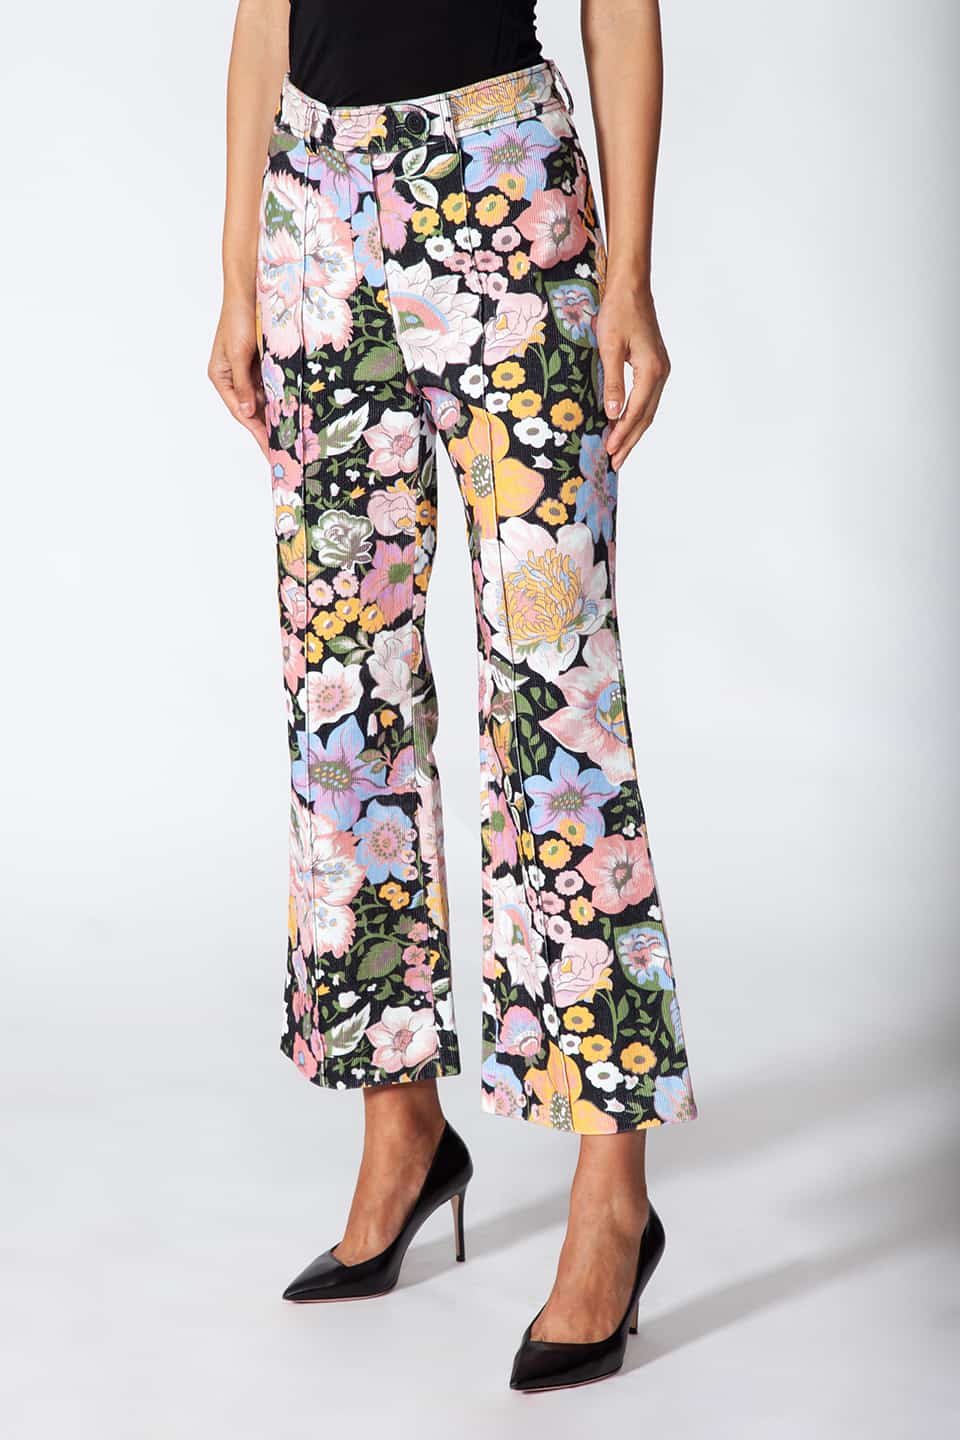 Model showing Manoush European stylist's flare trousers in corduroy with floral print, in pose for side view